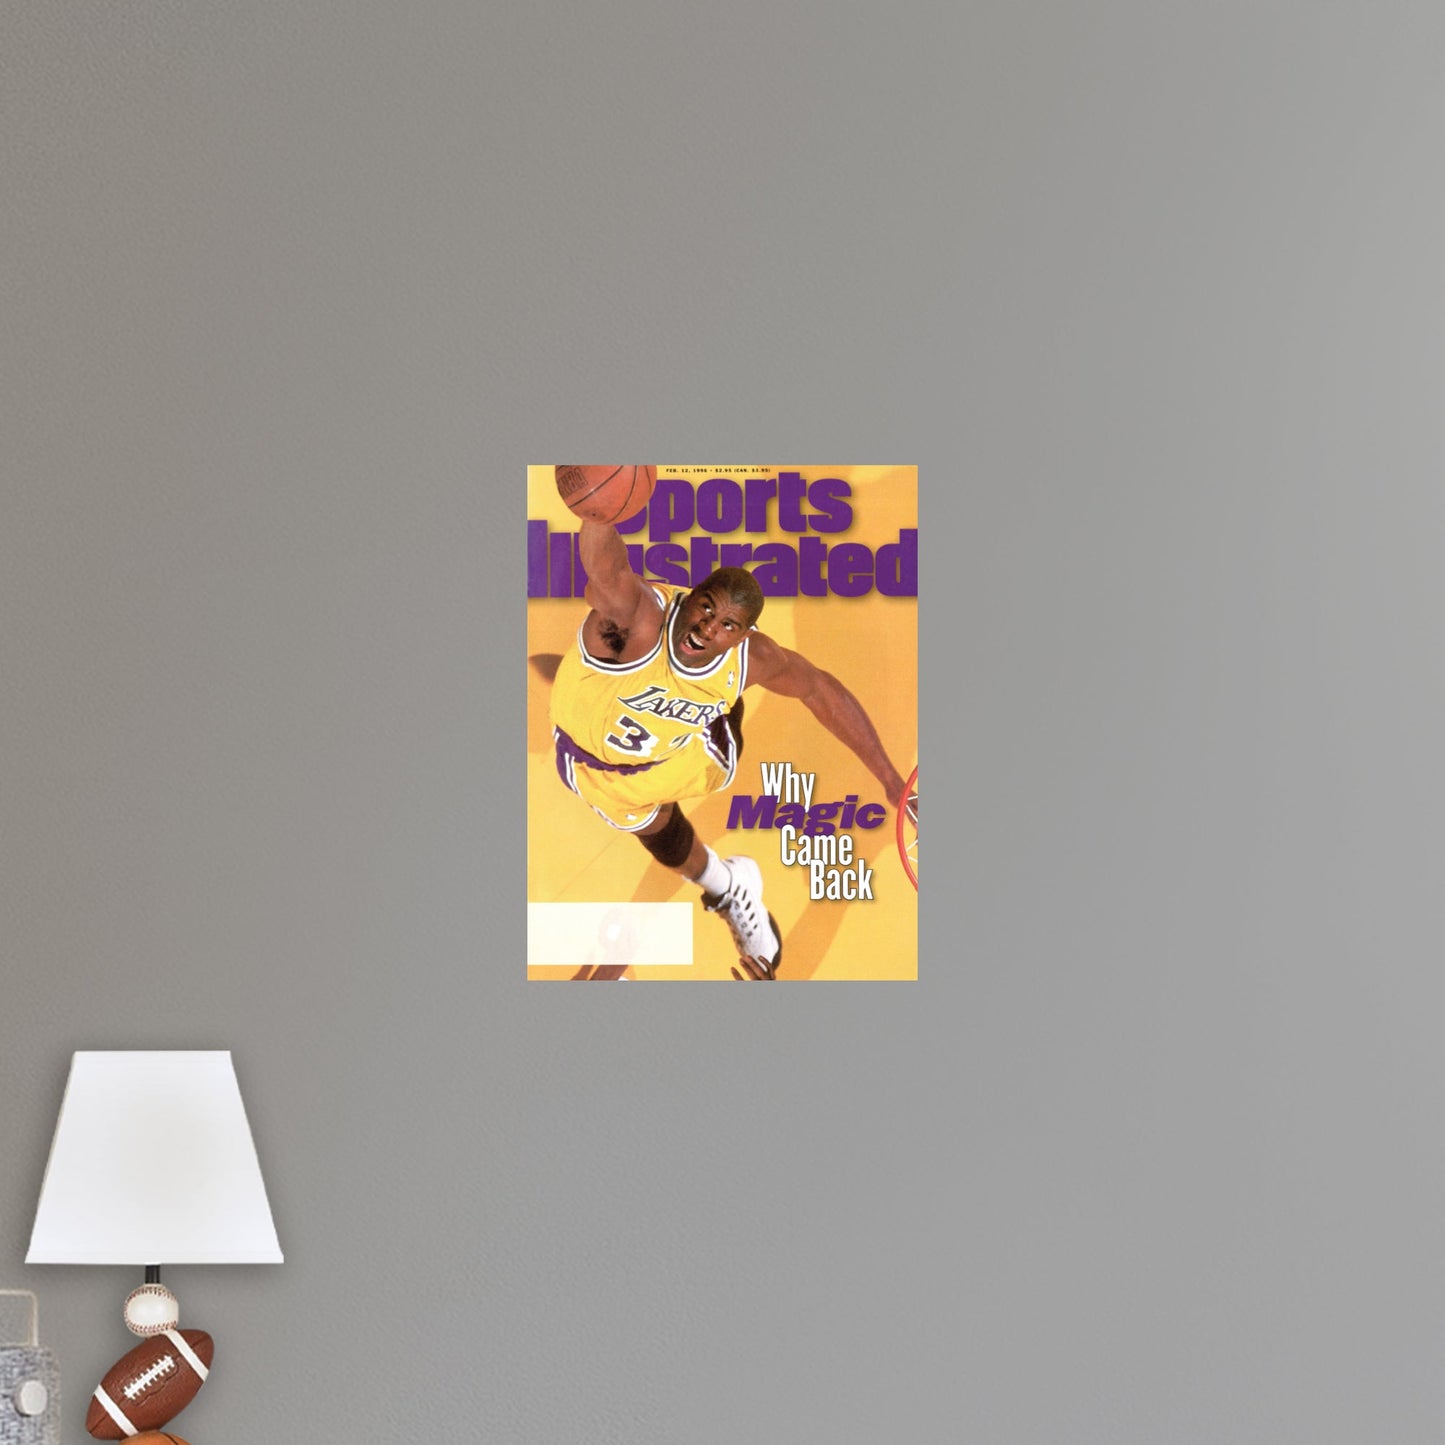 Los Angeles Lakers: February 1996 Sports Illustrated Cover - Officially Licensed NBA Removable Adhesive Decal